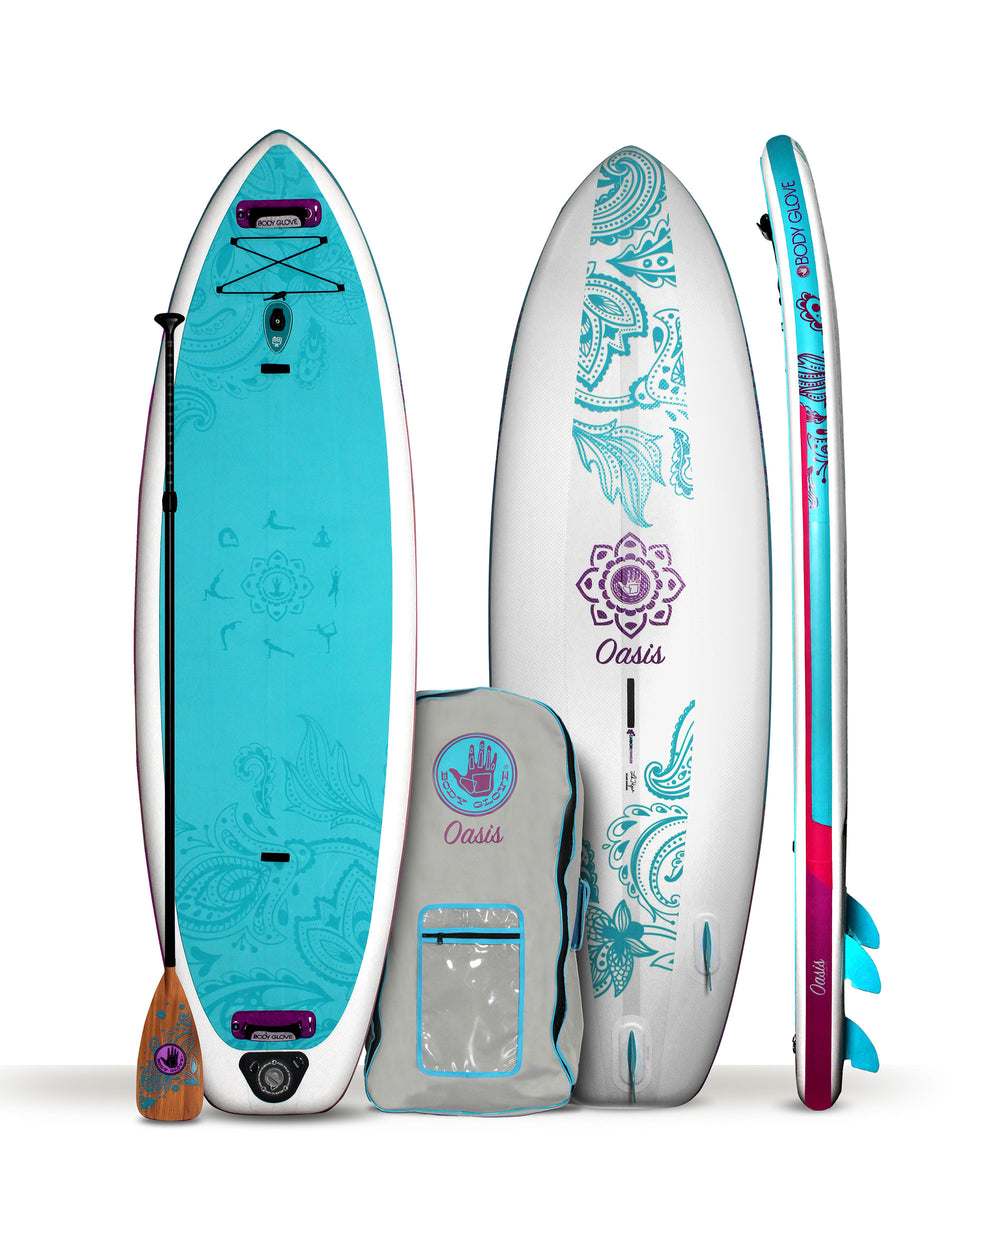 New BODY GLOVE Oasis Yoga Inflatable Paddle Board ! All